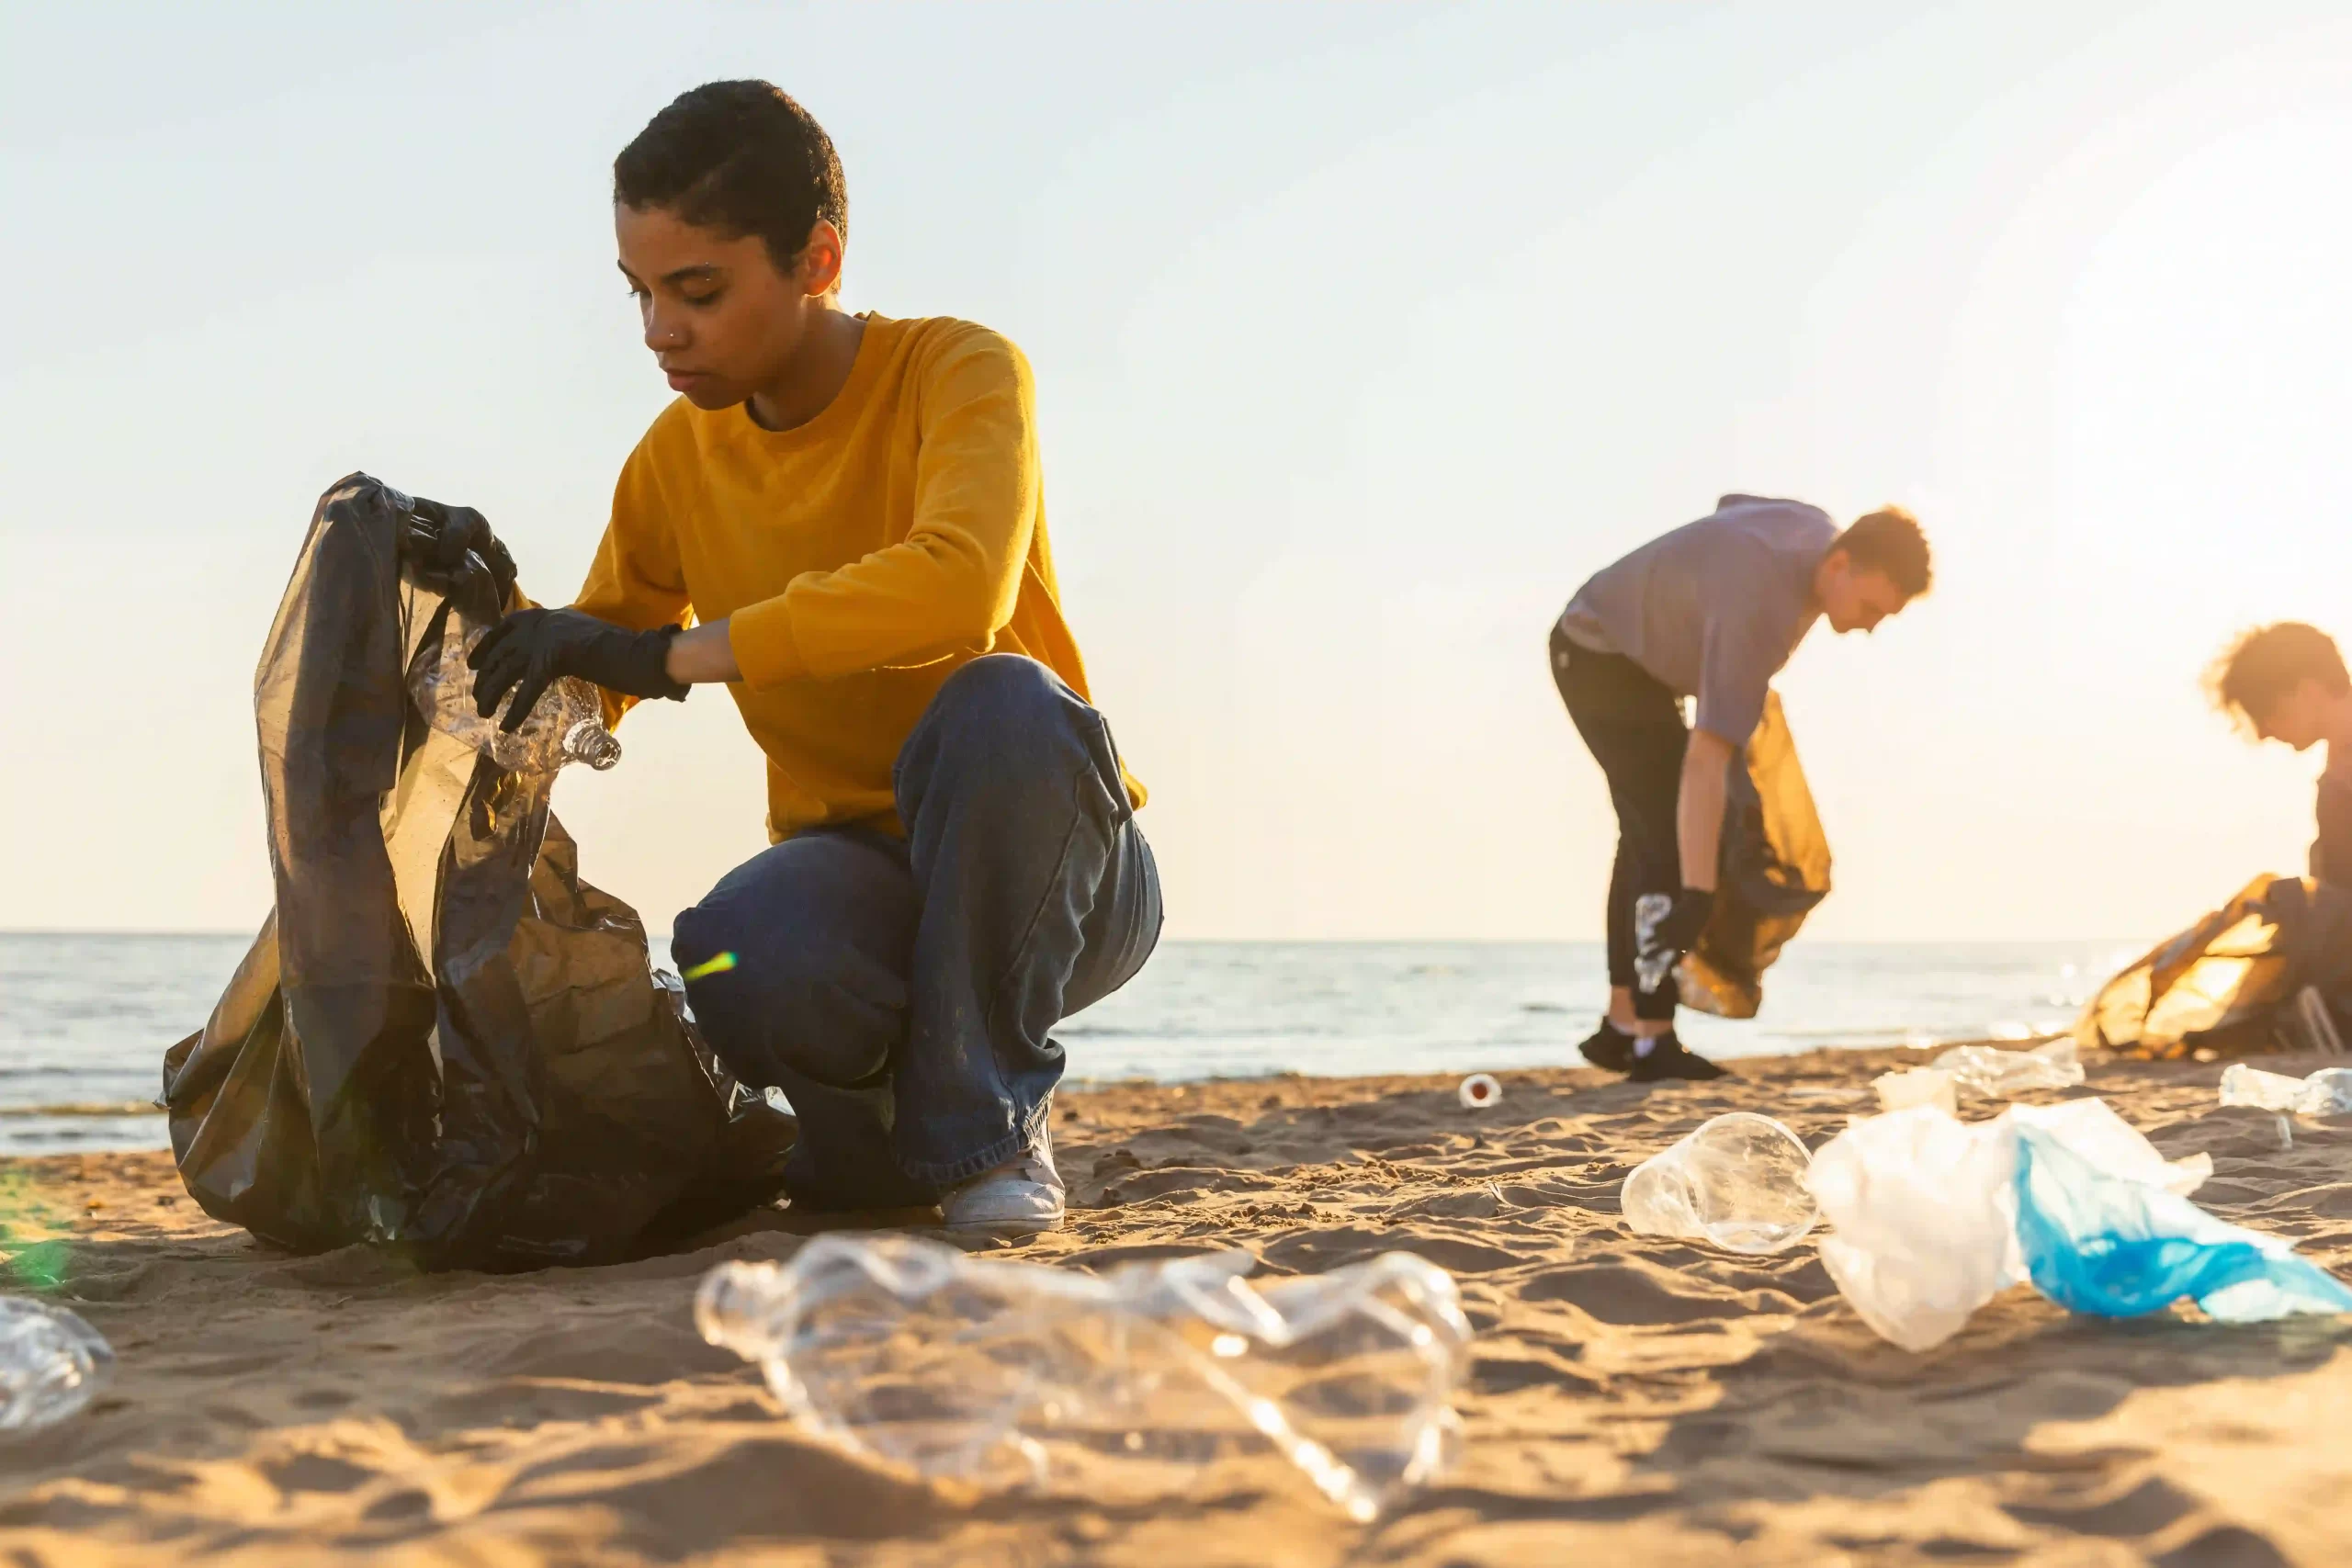 People on a beach with bin bags cleaning up plastic waste.